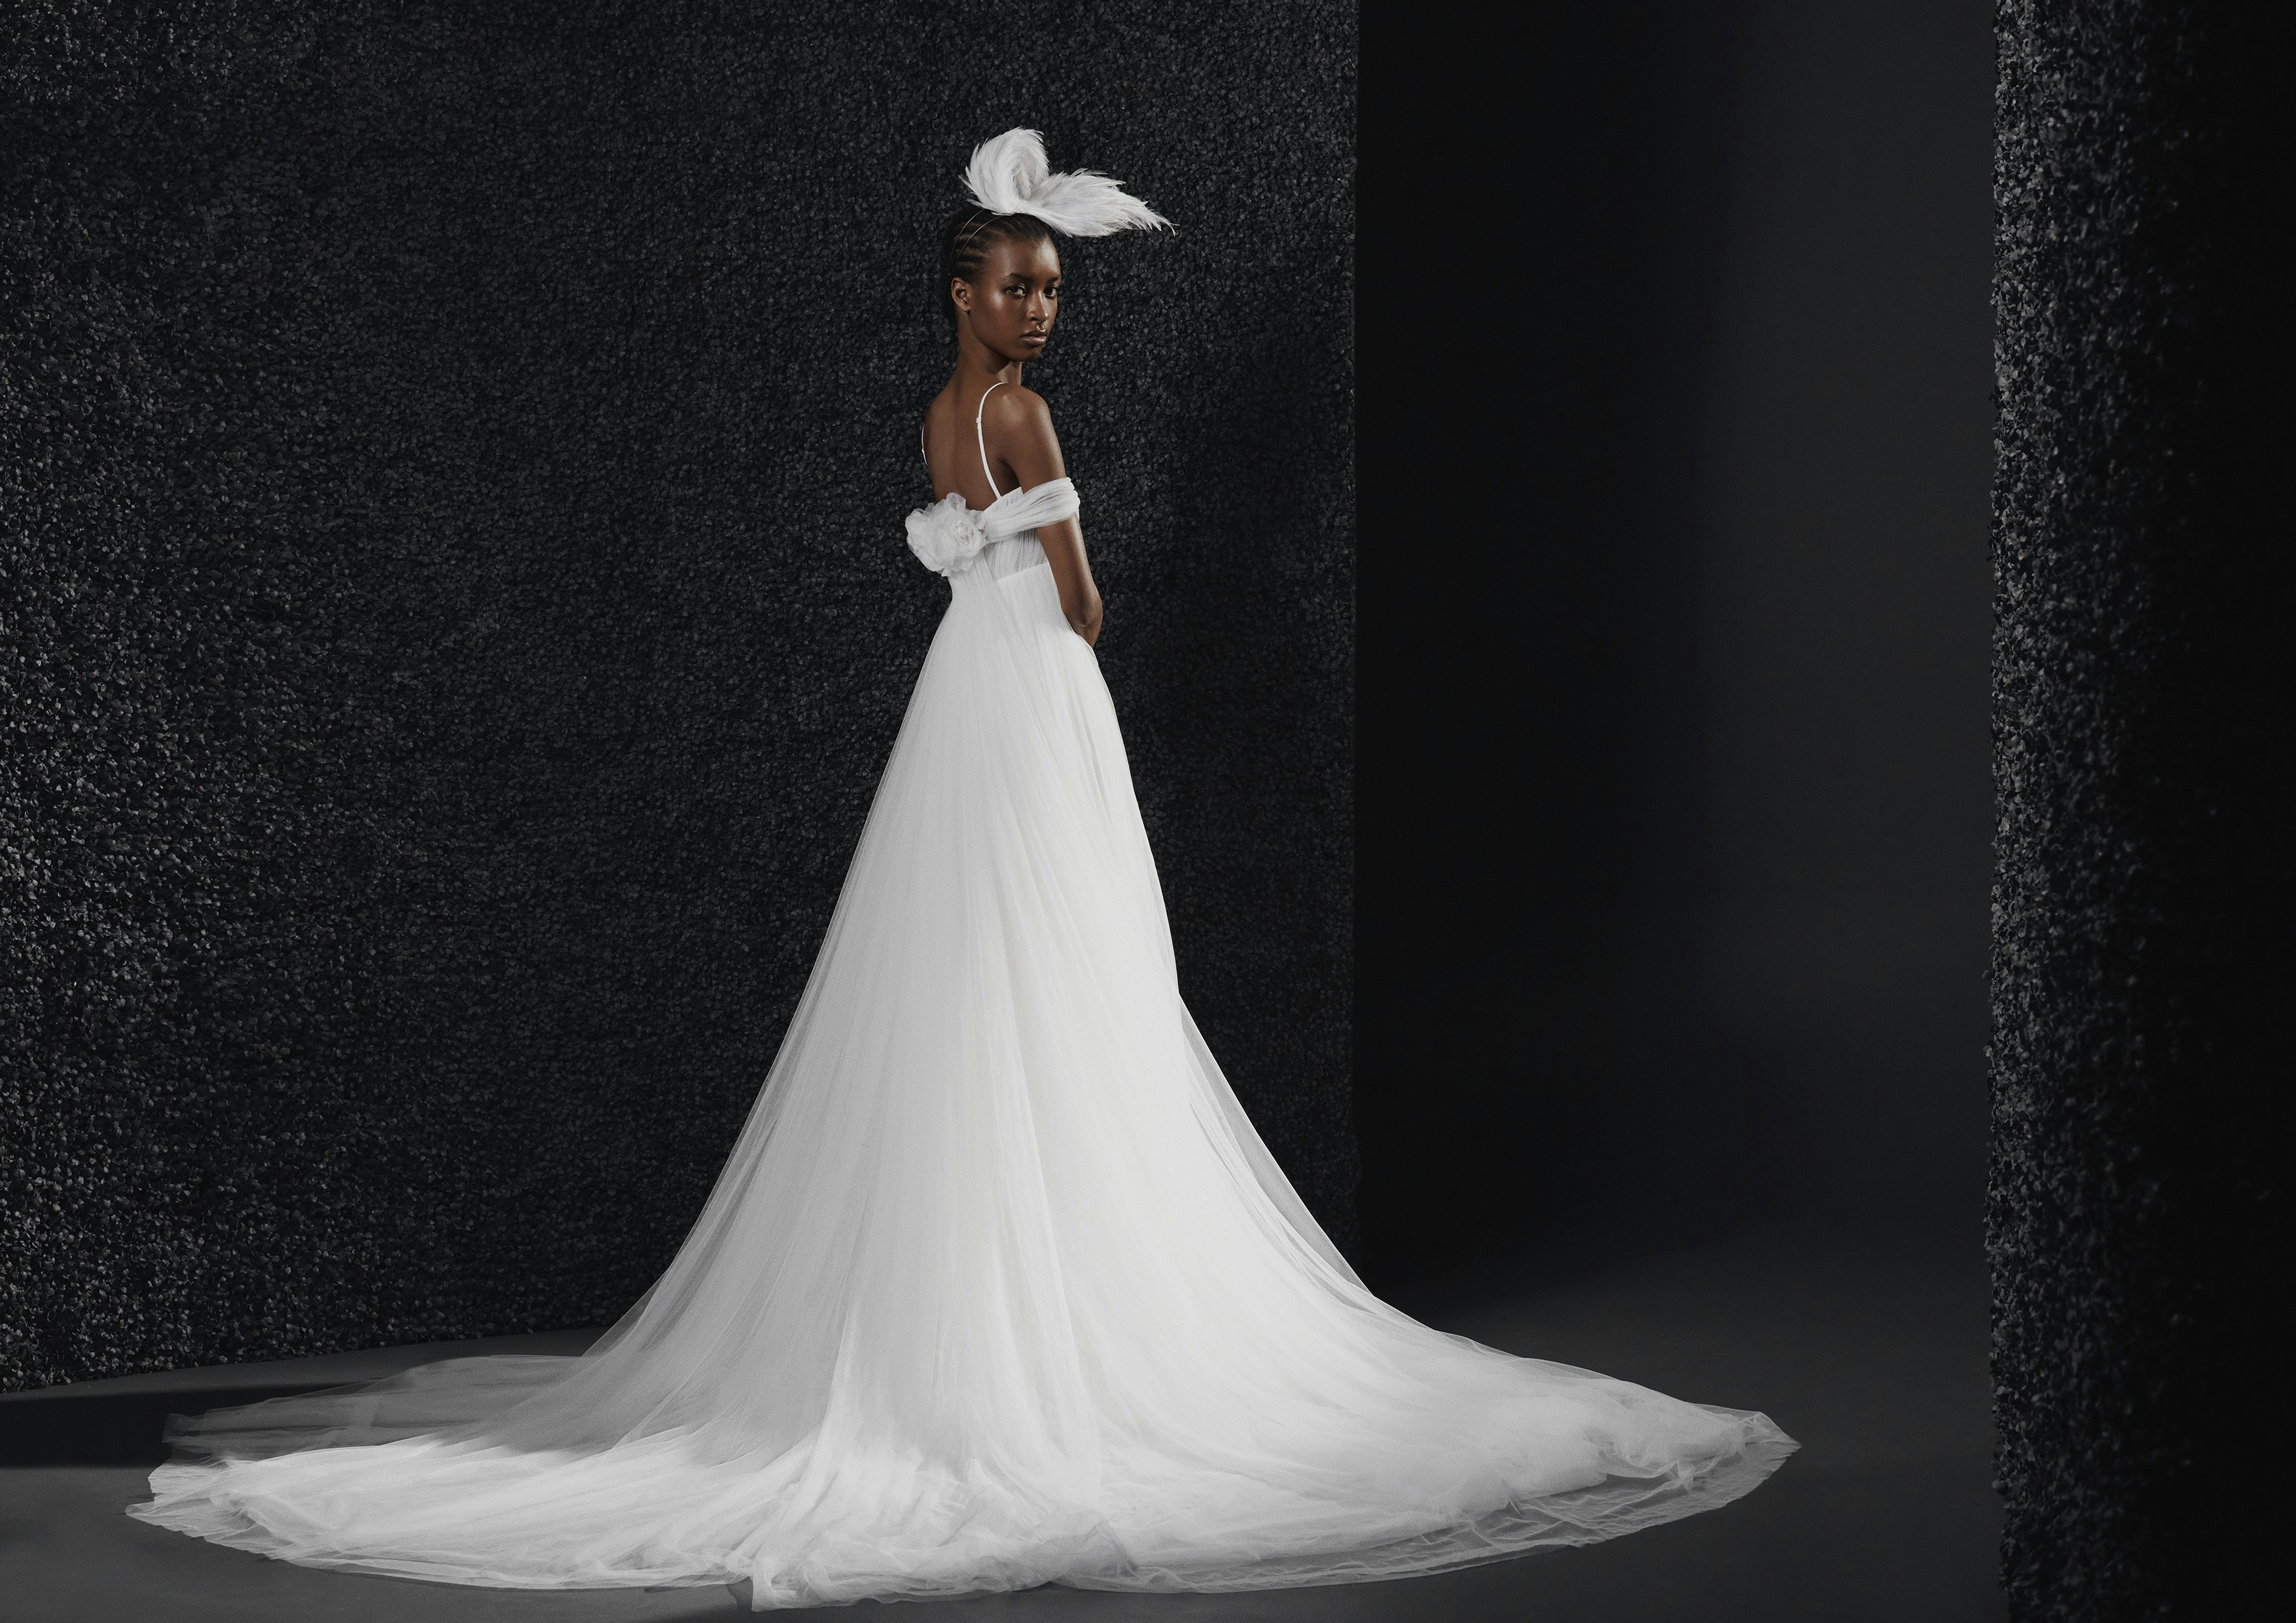 How Vera Wang changed the way brides dressed forever